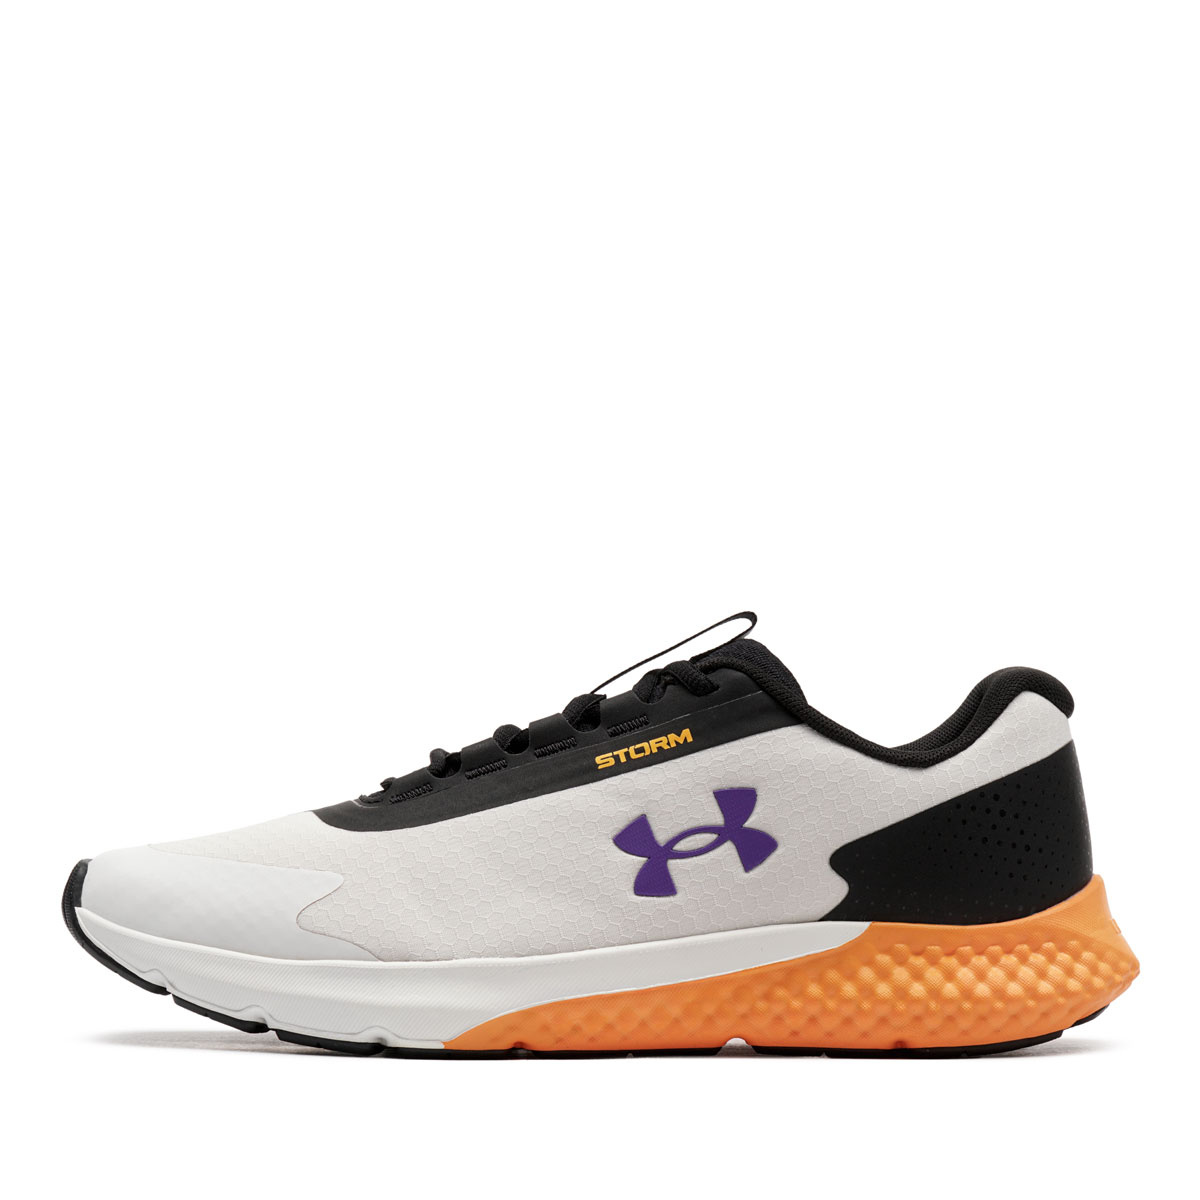 Under Armour sneakers - 3025523-300